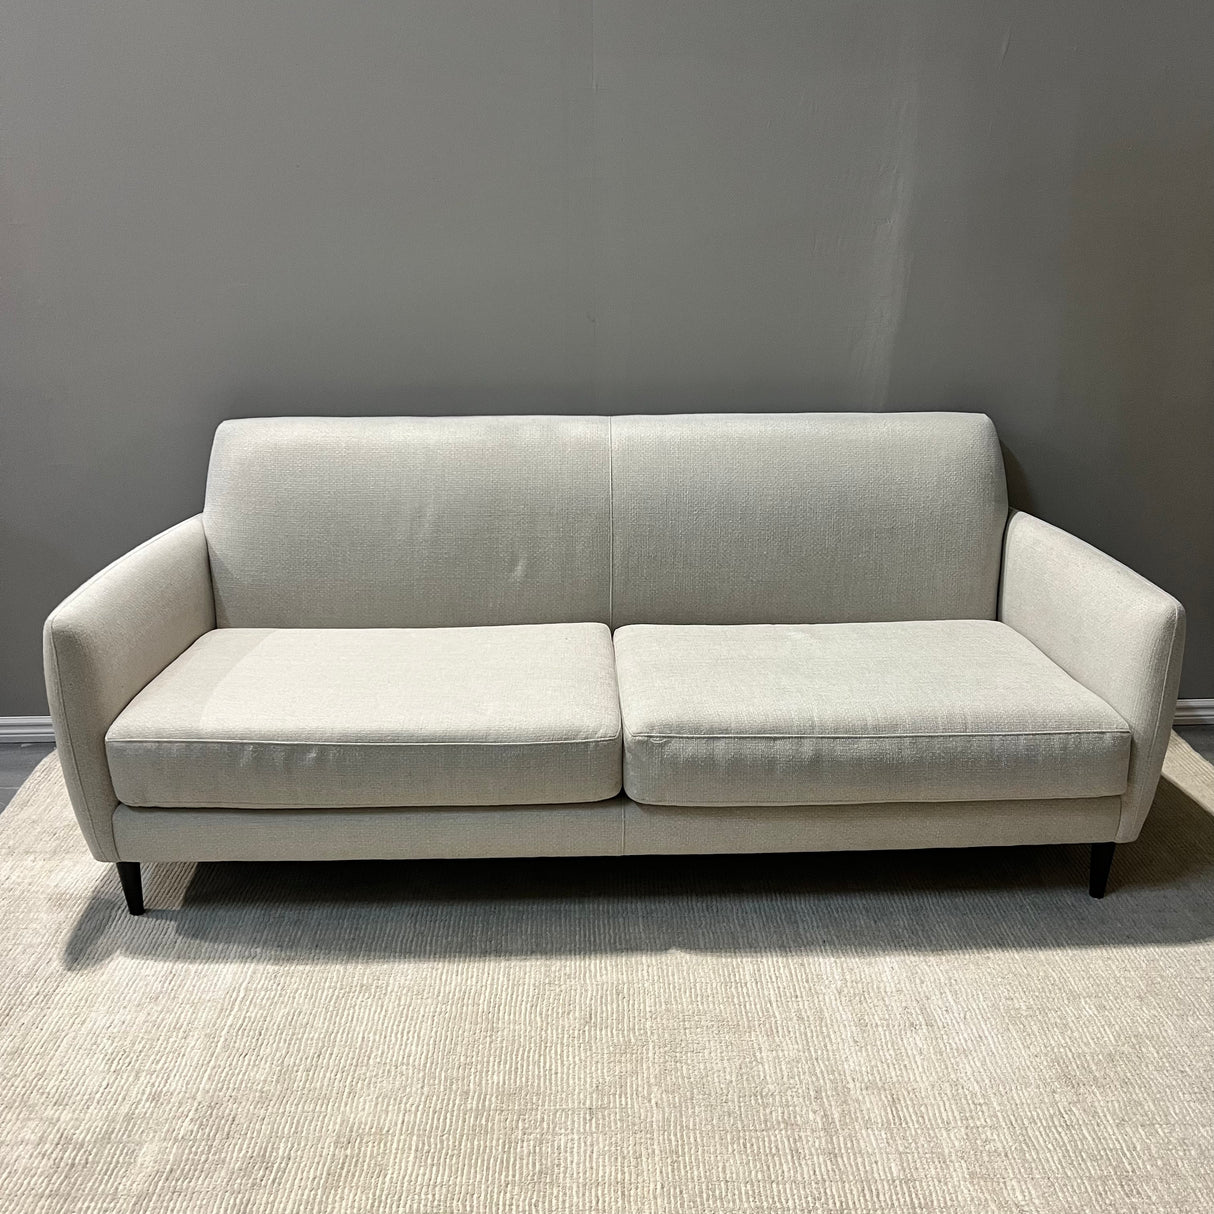 Cb2 Parlor Mid Century Style Sofa Enliven Mart